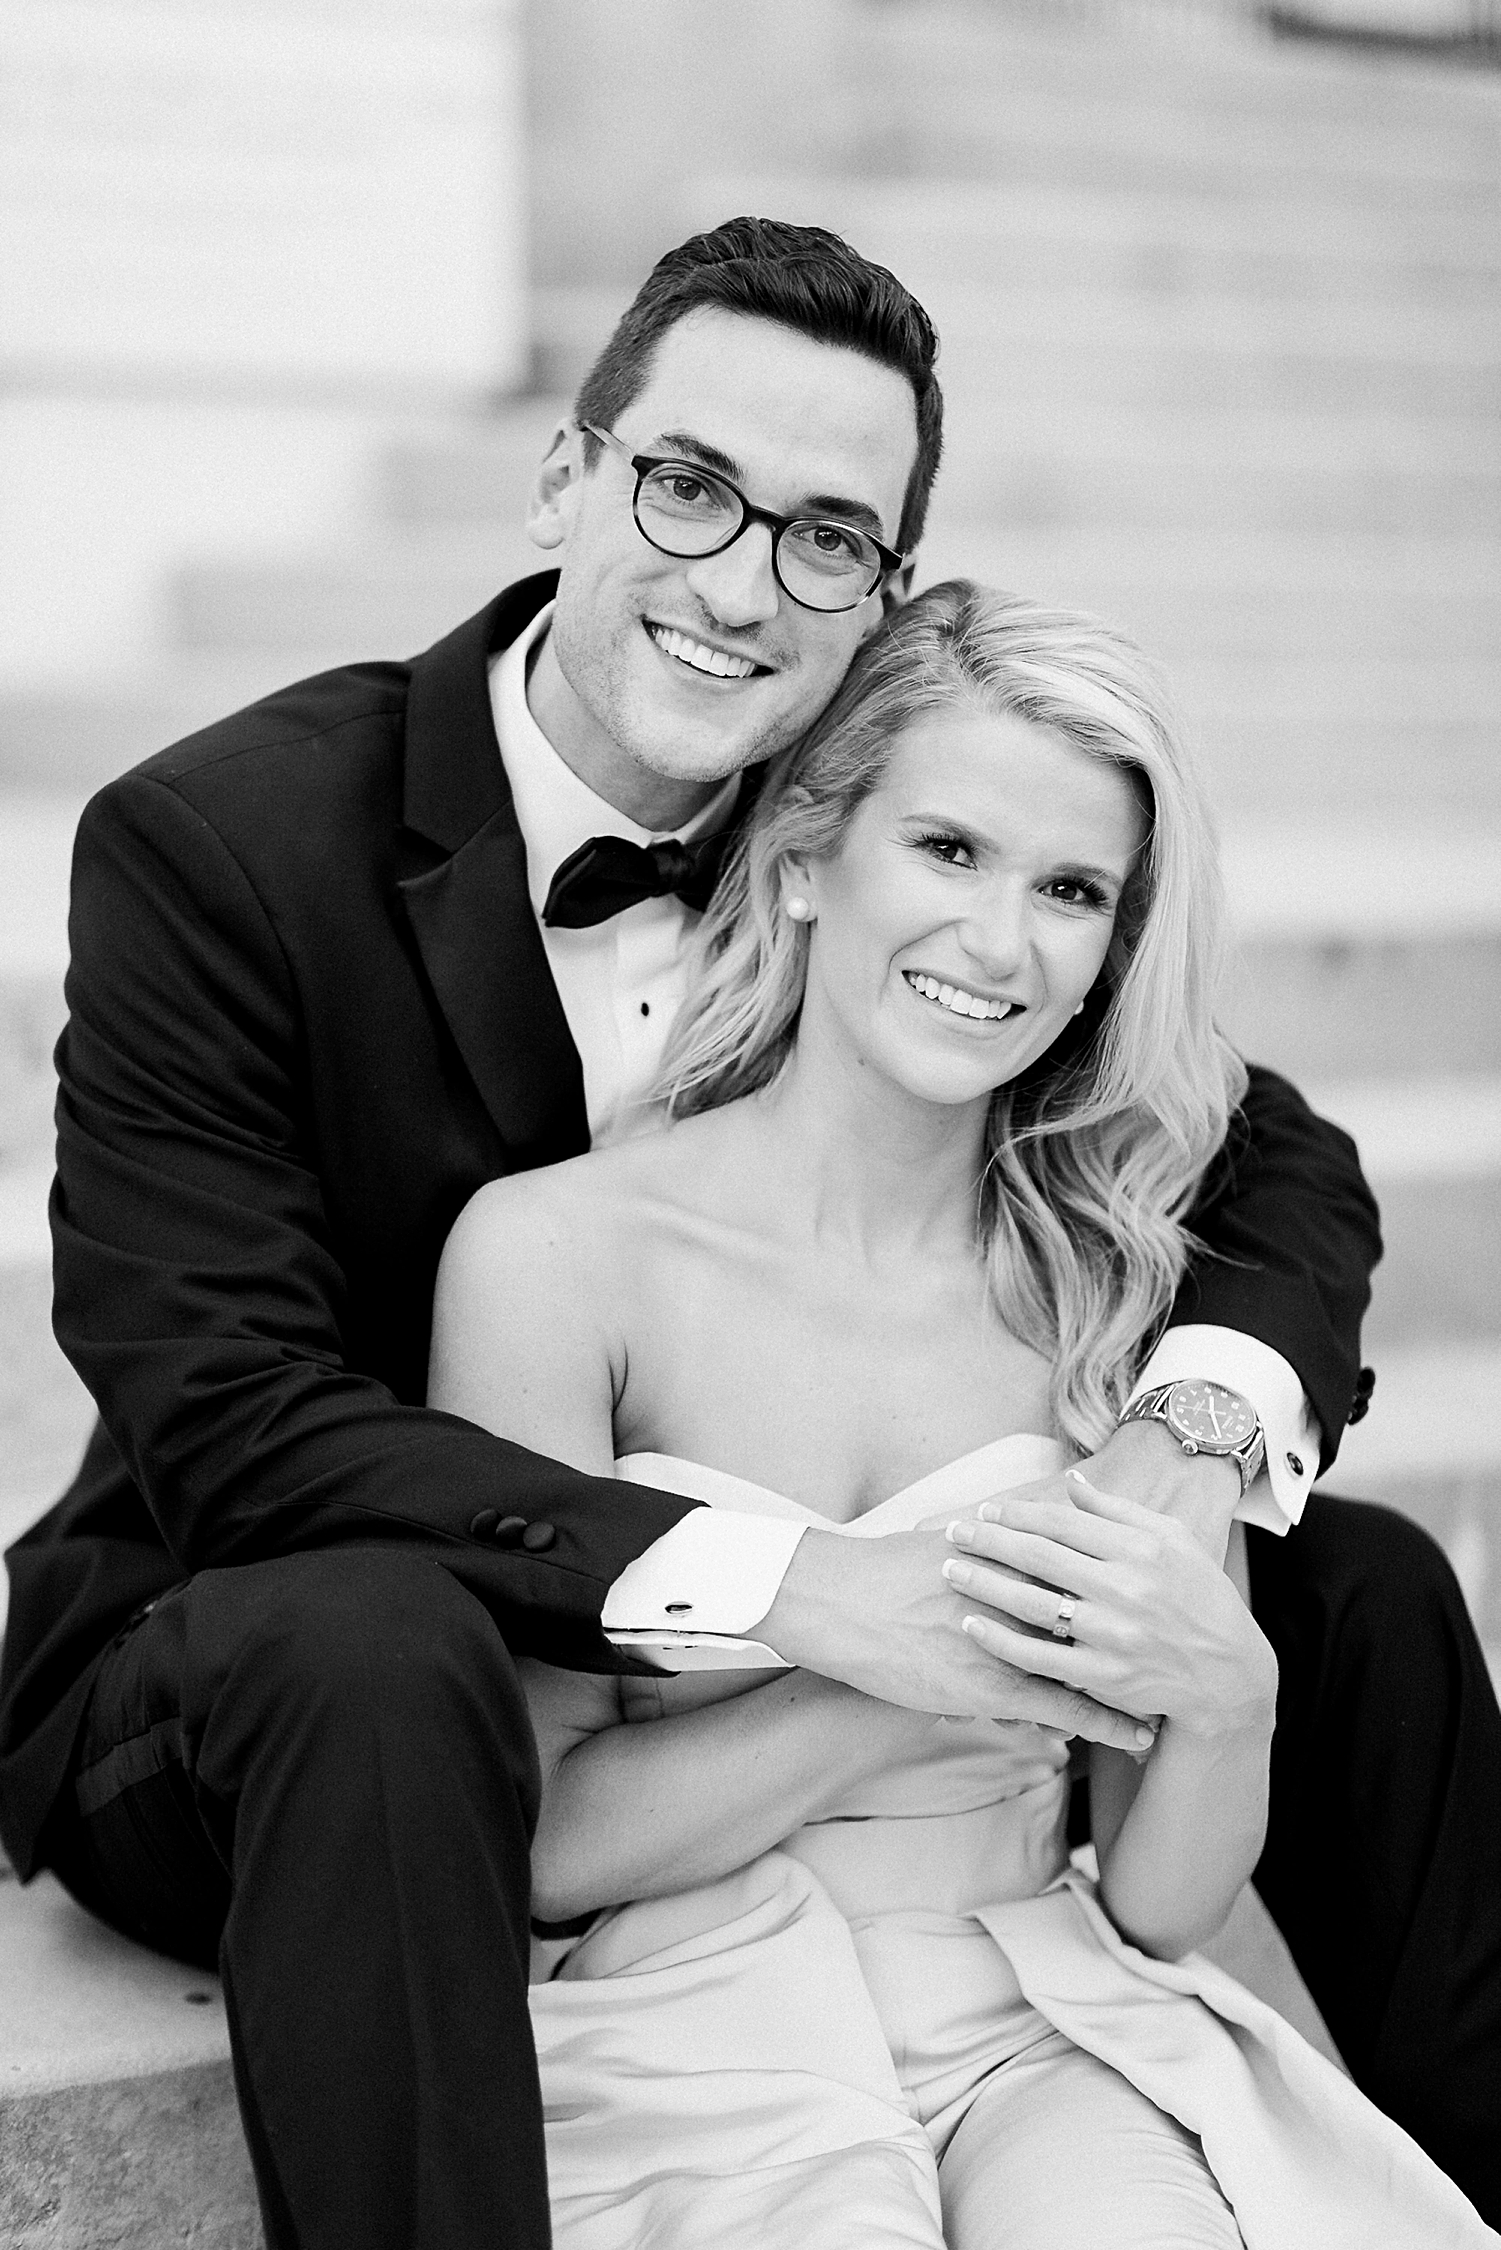 Man in black tuxedo with arms around woman in light blue jumpsuit sitting on stairs smiling